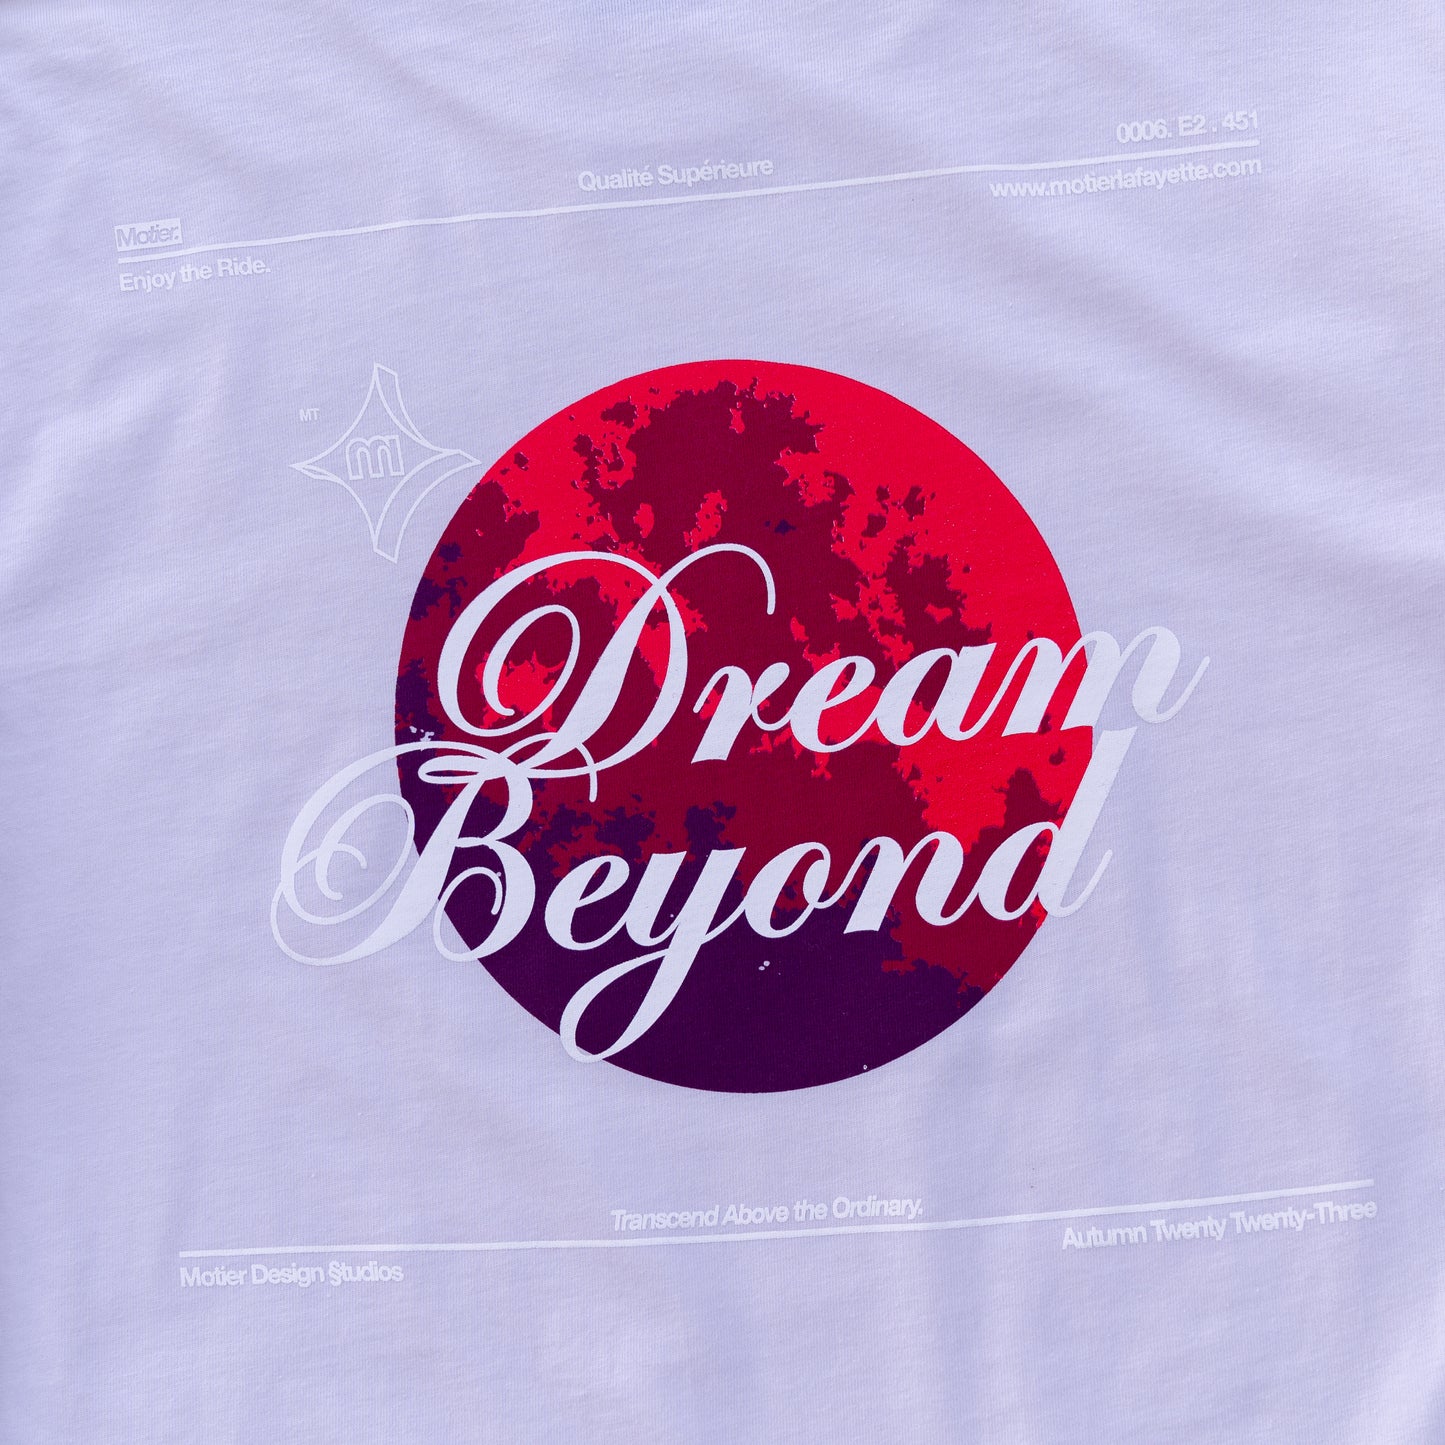 The Dream Beyond L/S Luxe Tee (Lily White)